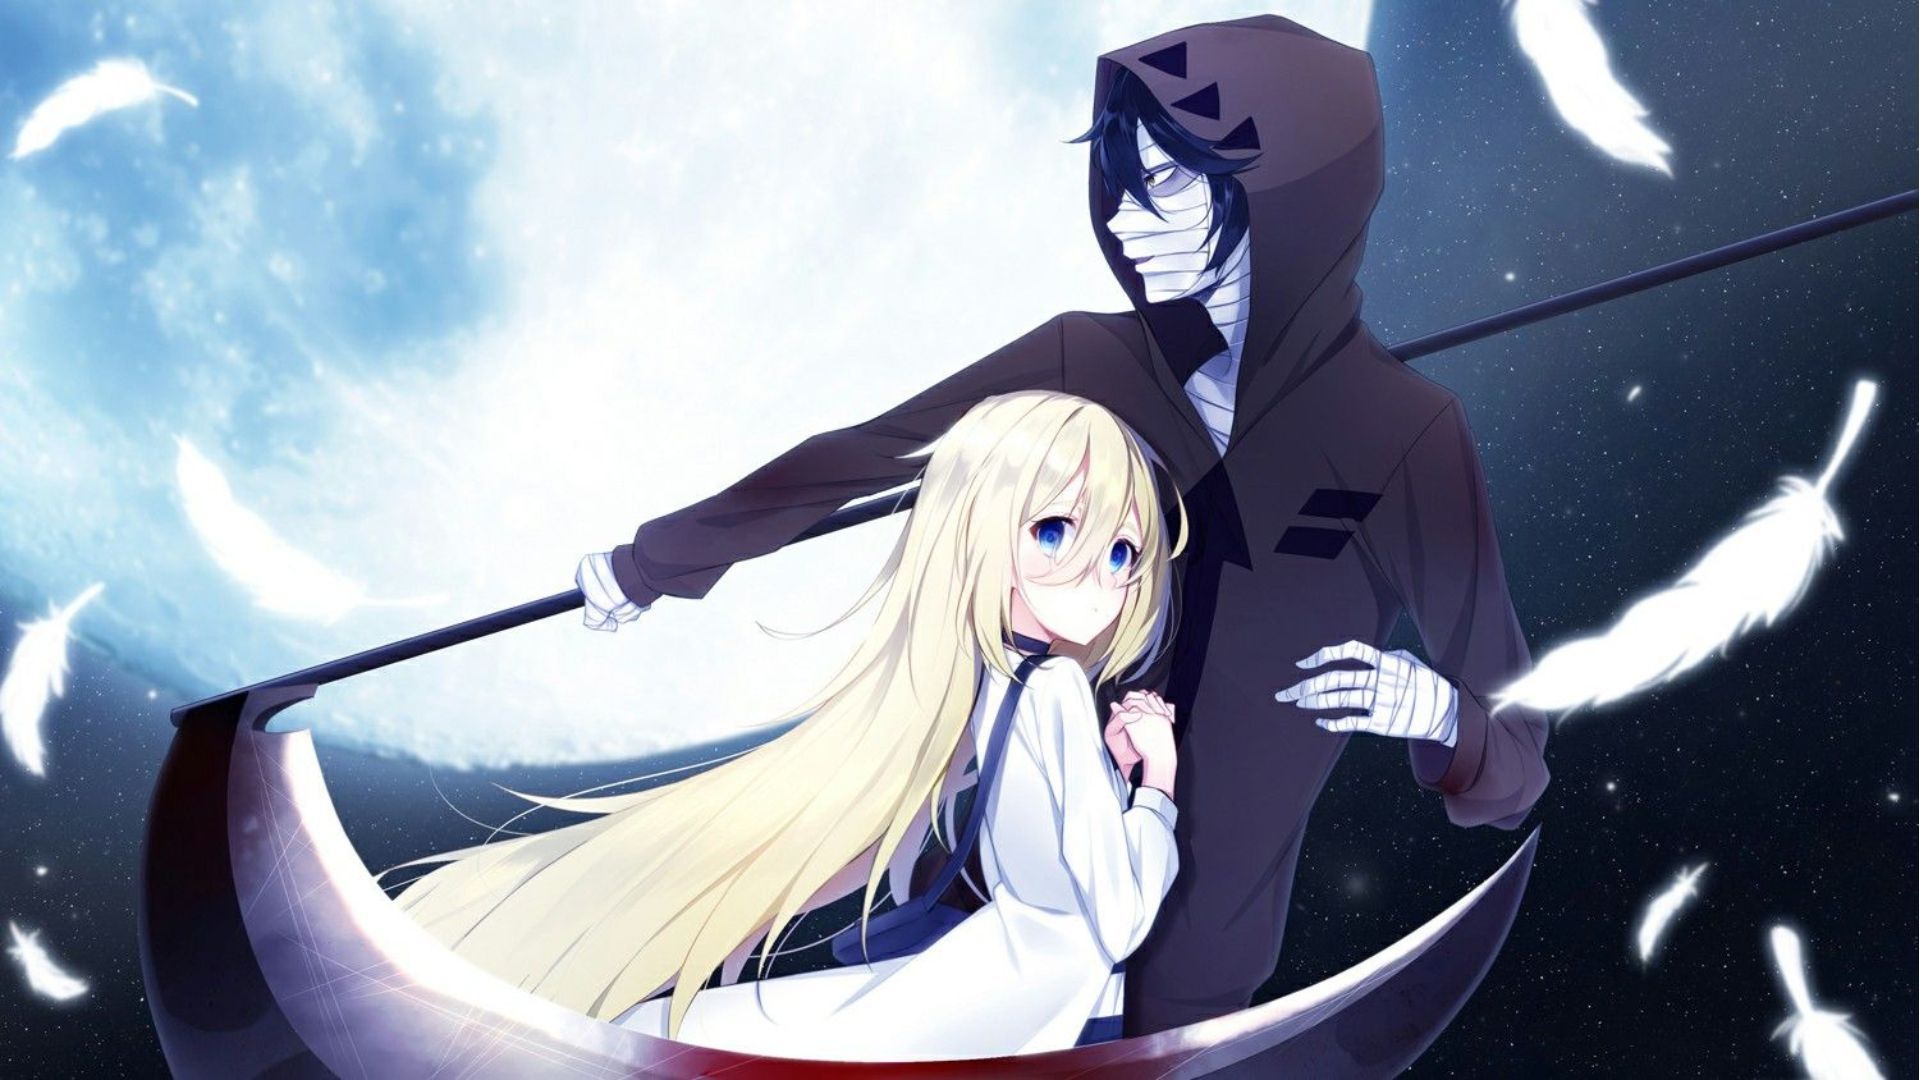 Angels of Death – Ep. 1 : Os Olhos azuis